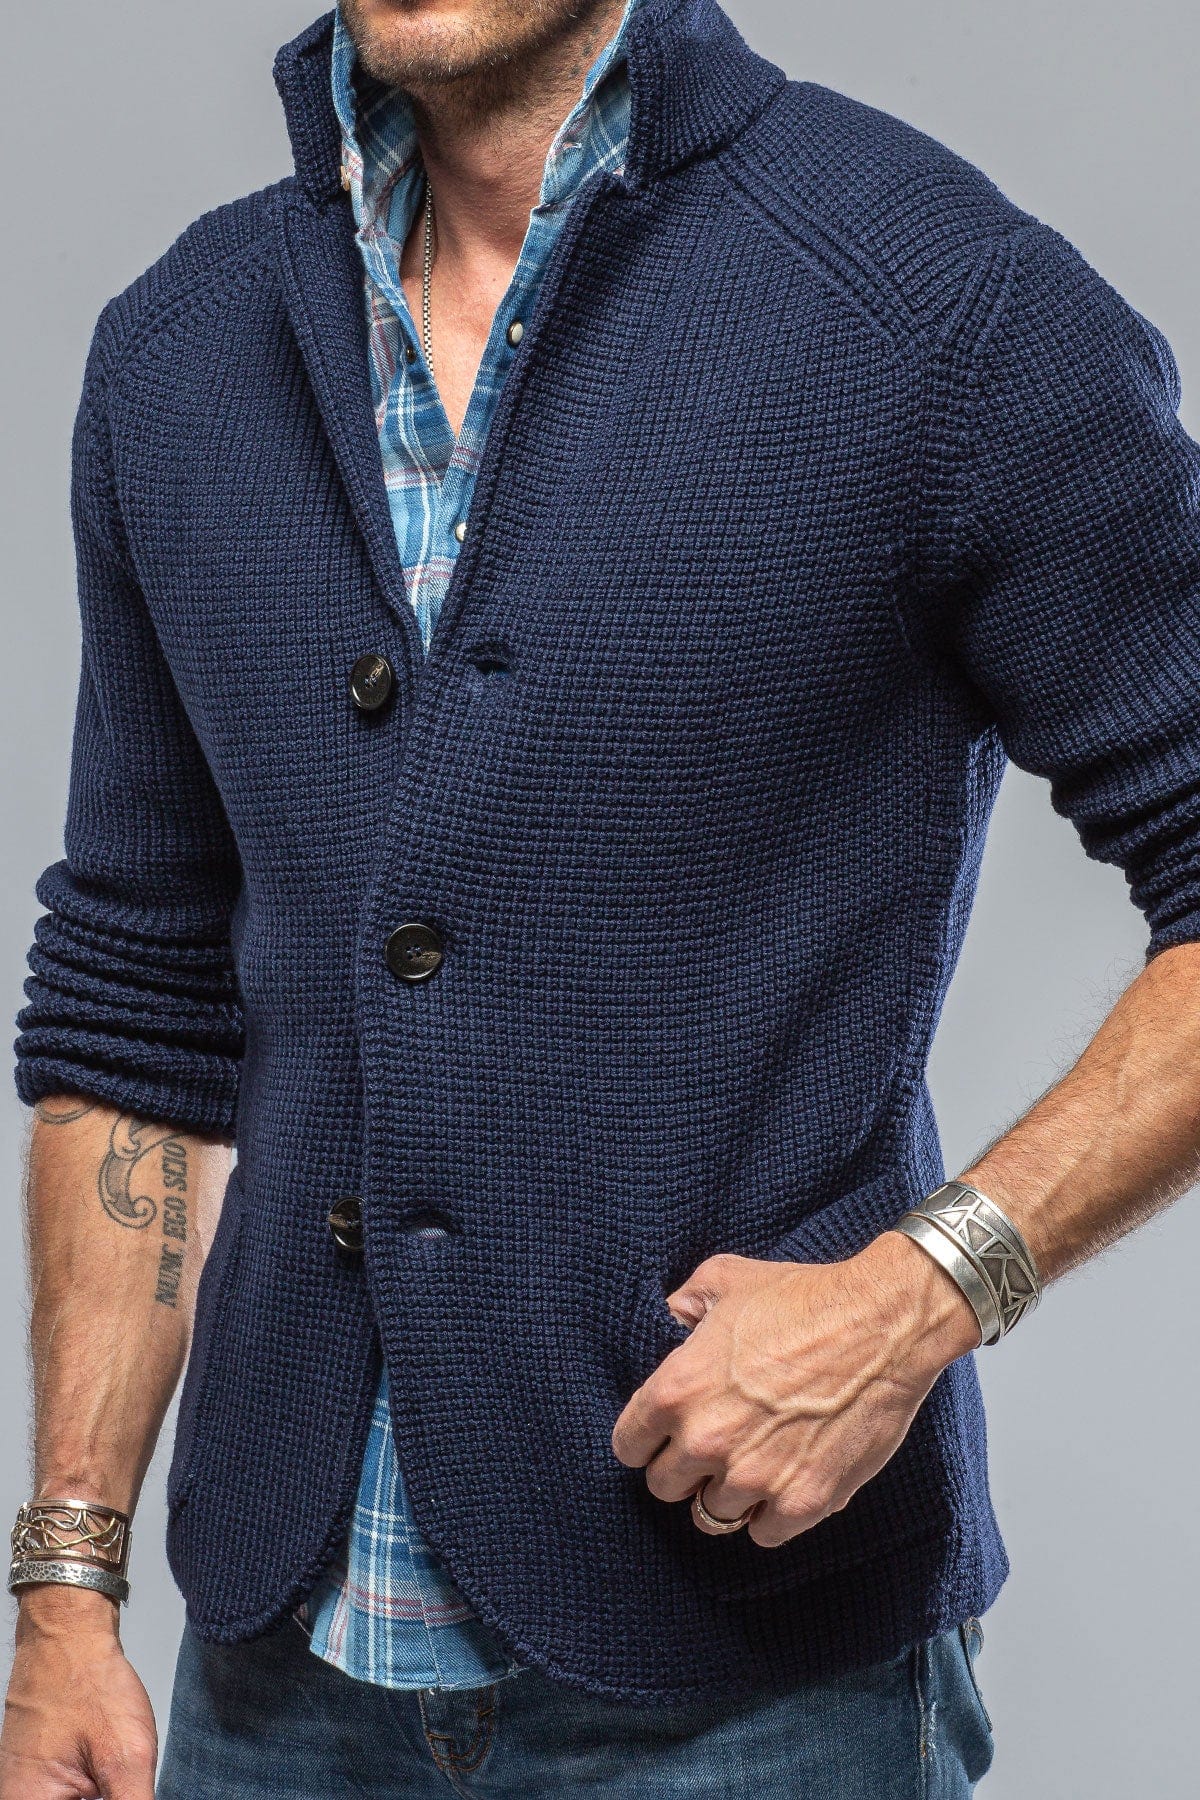 Tuscan Sweater Jacket In Navy - AXEL'S